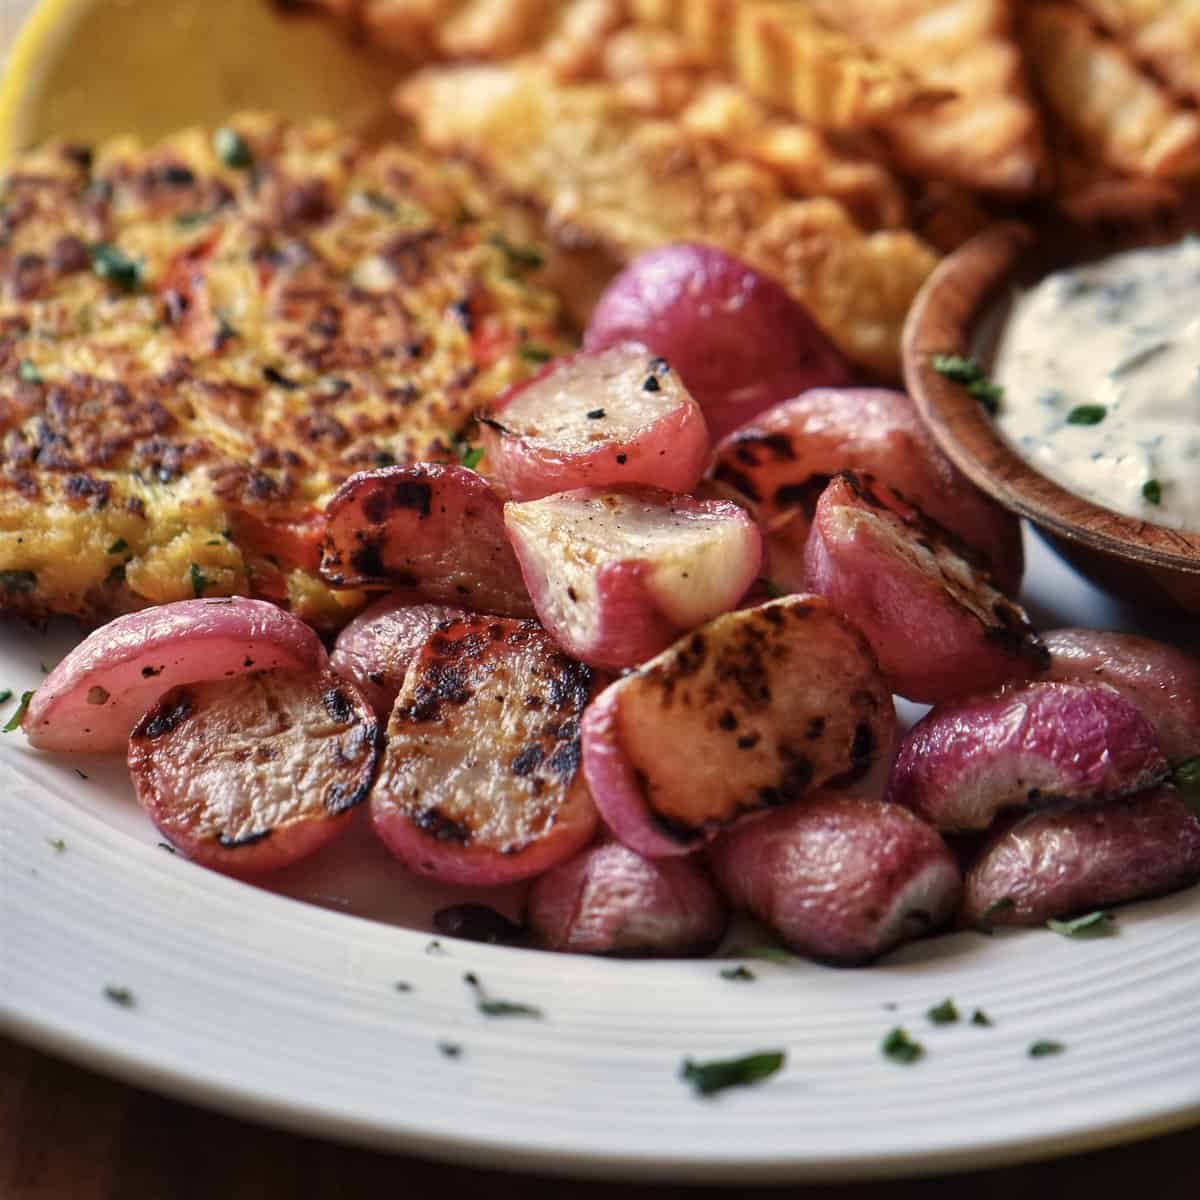 Oven roasted radishes next to a tuna patty.